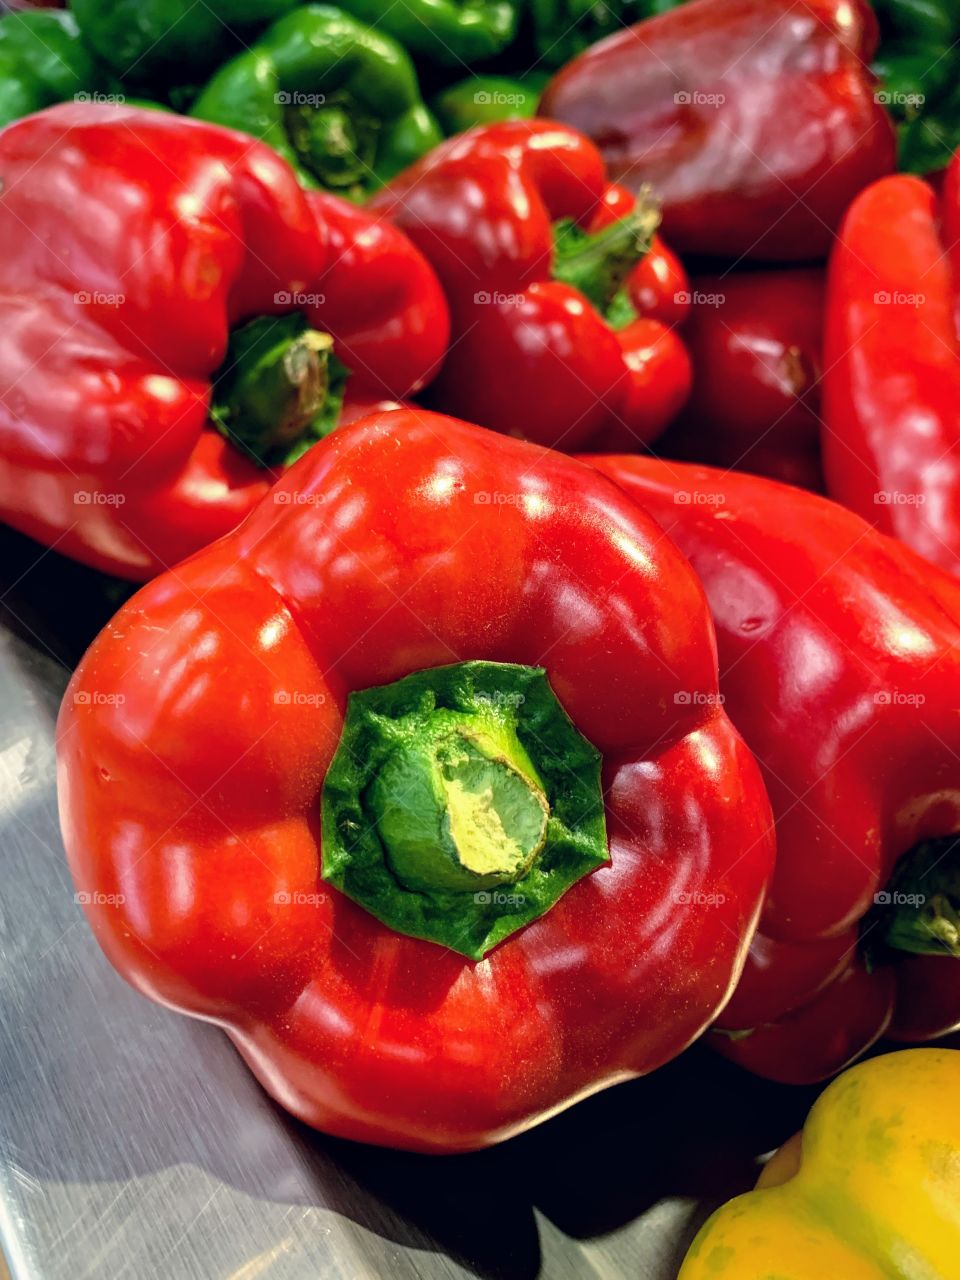 Red Bell peppers